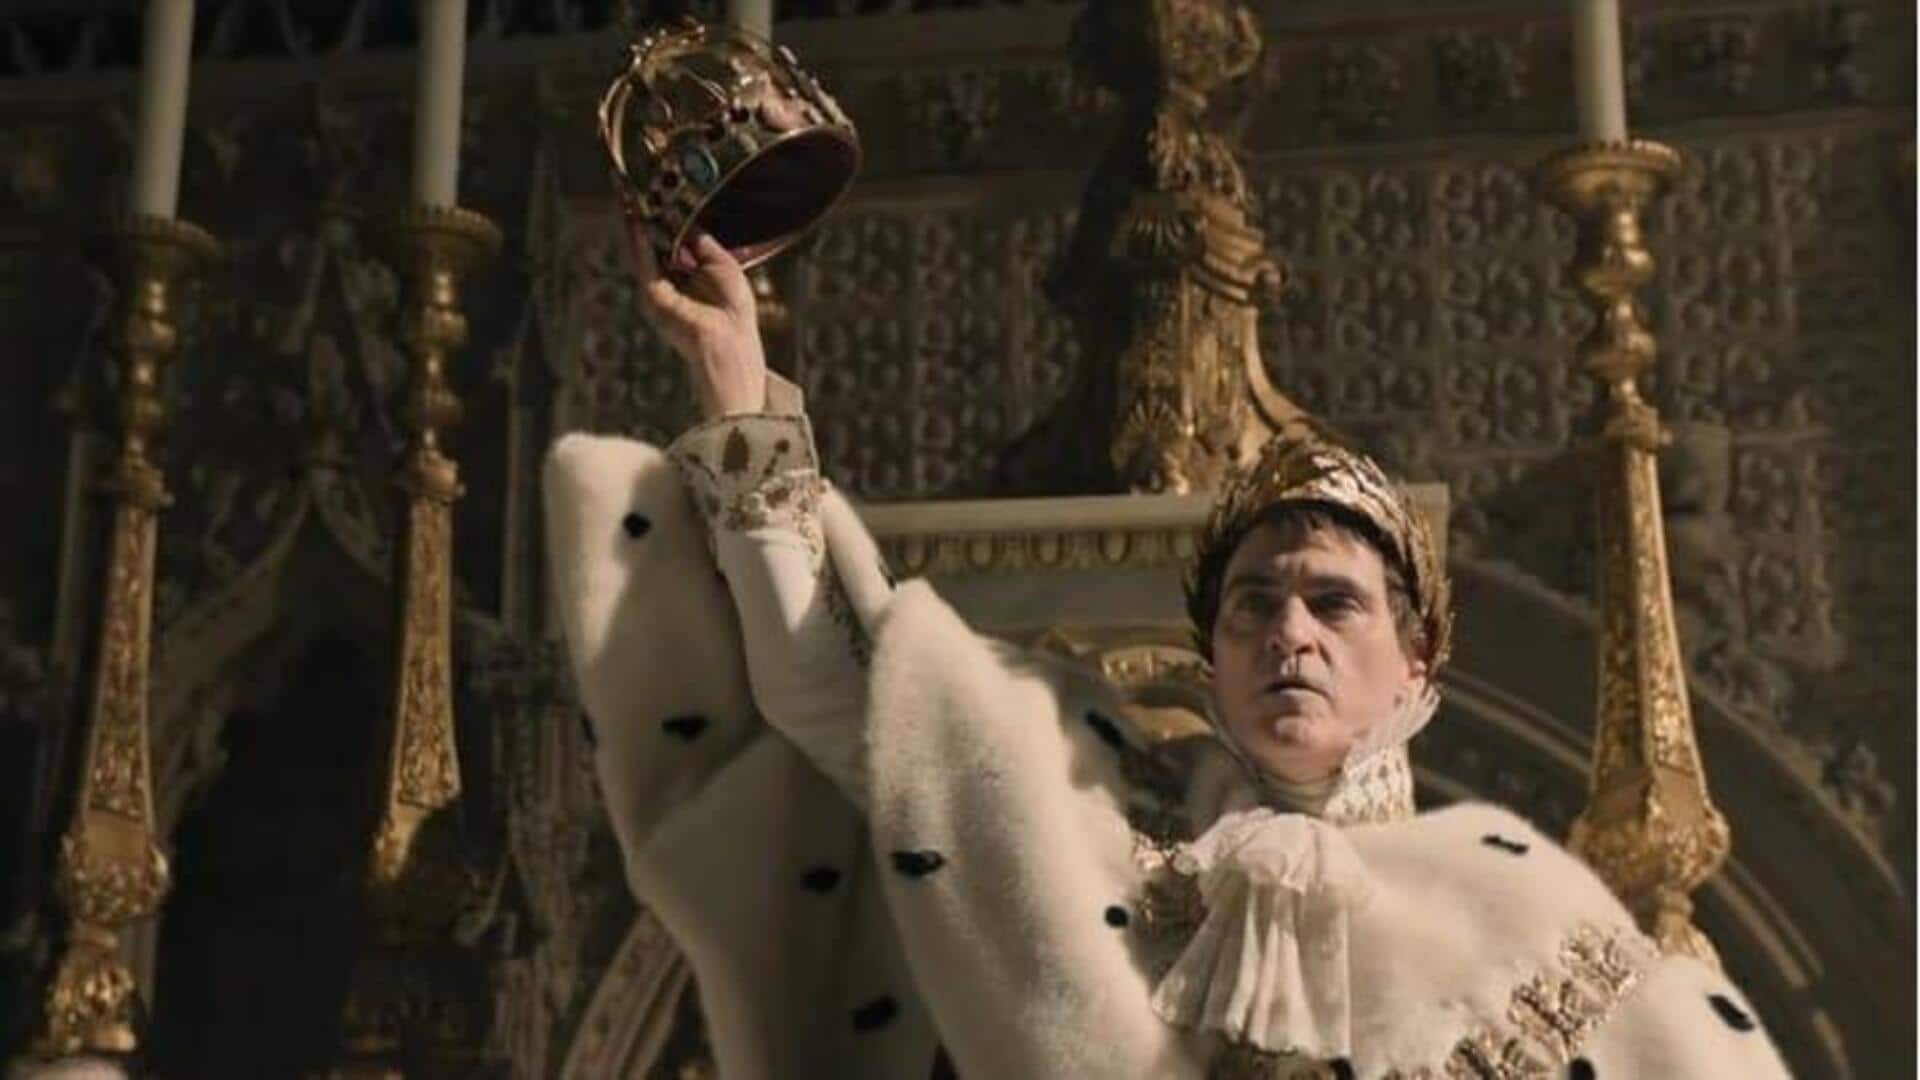 Why 'Napoleon' is receiving heavy criticism from French film critics